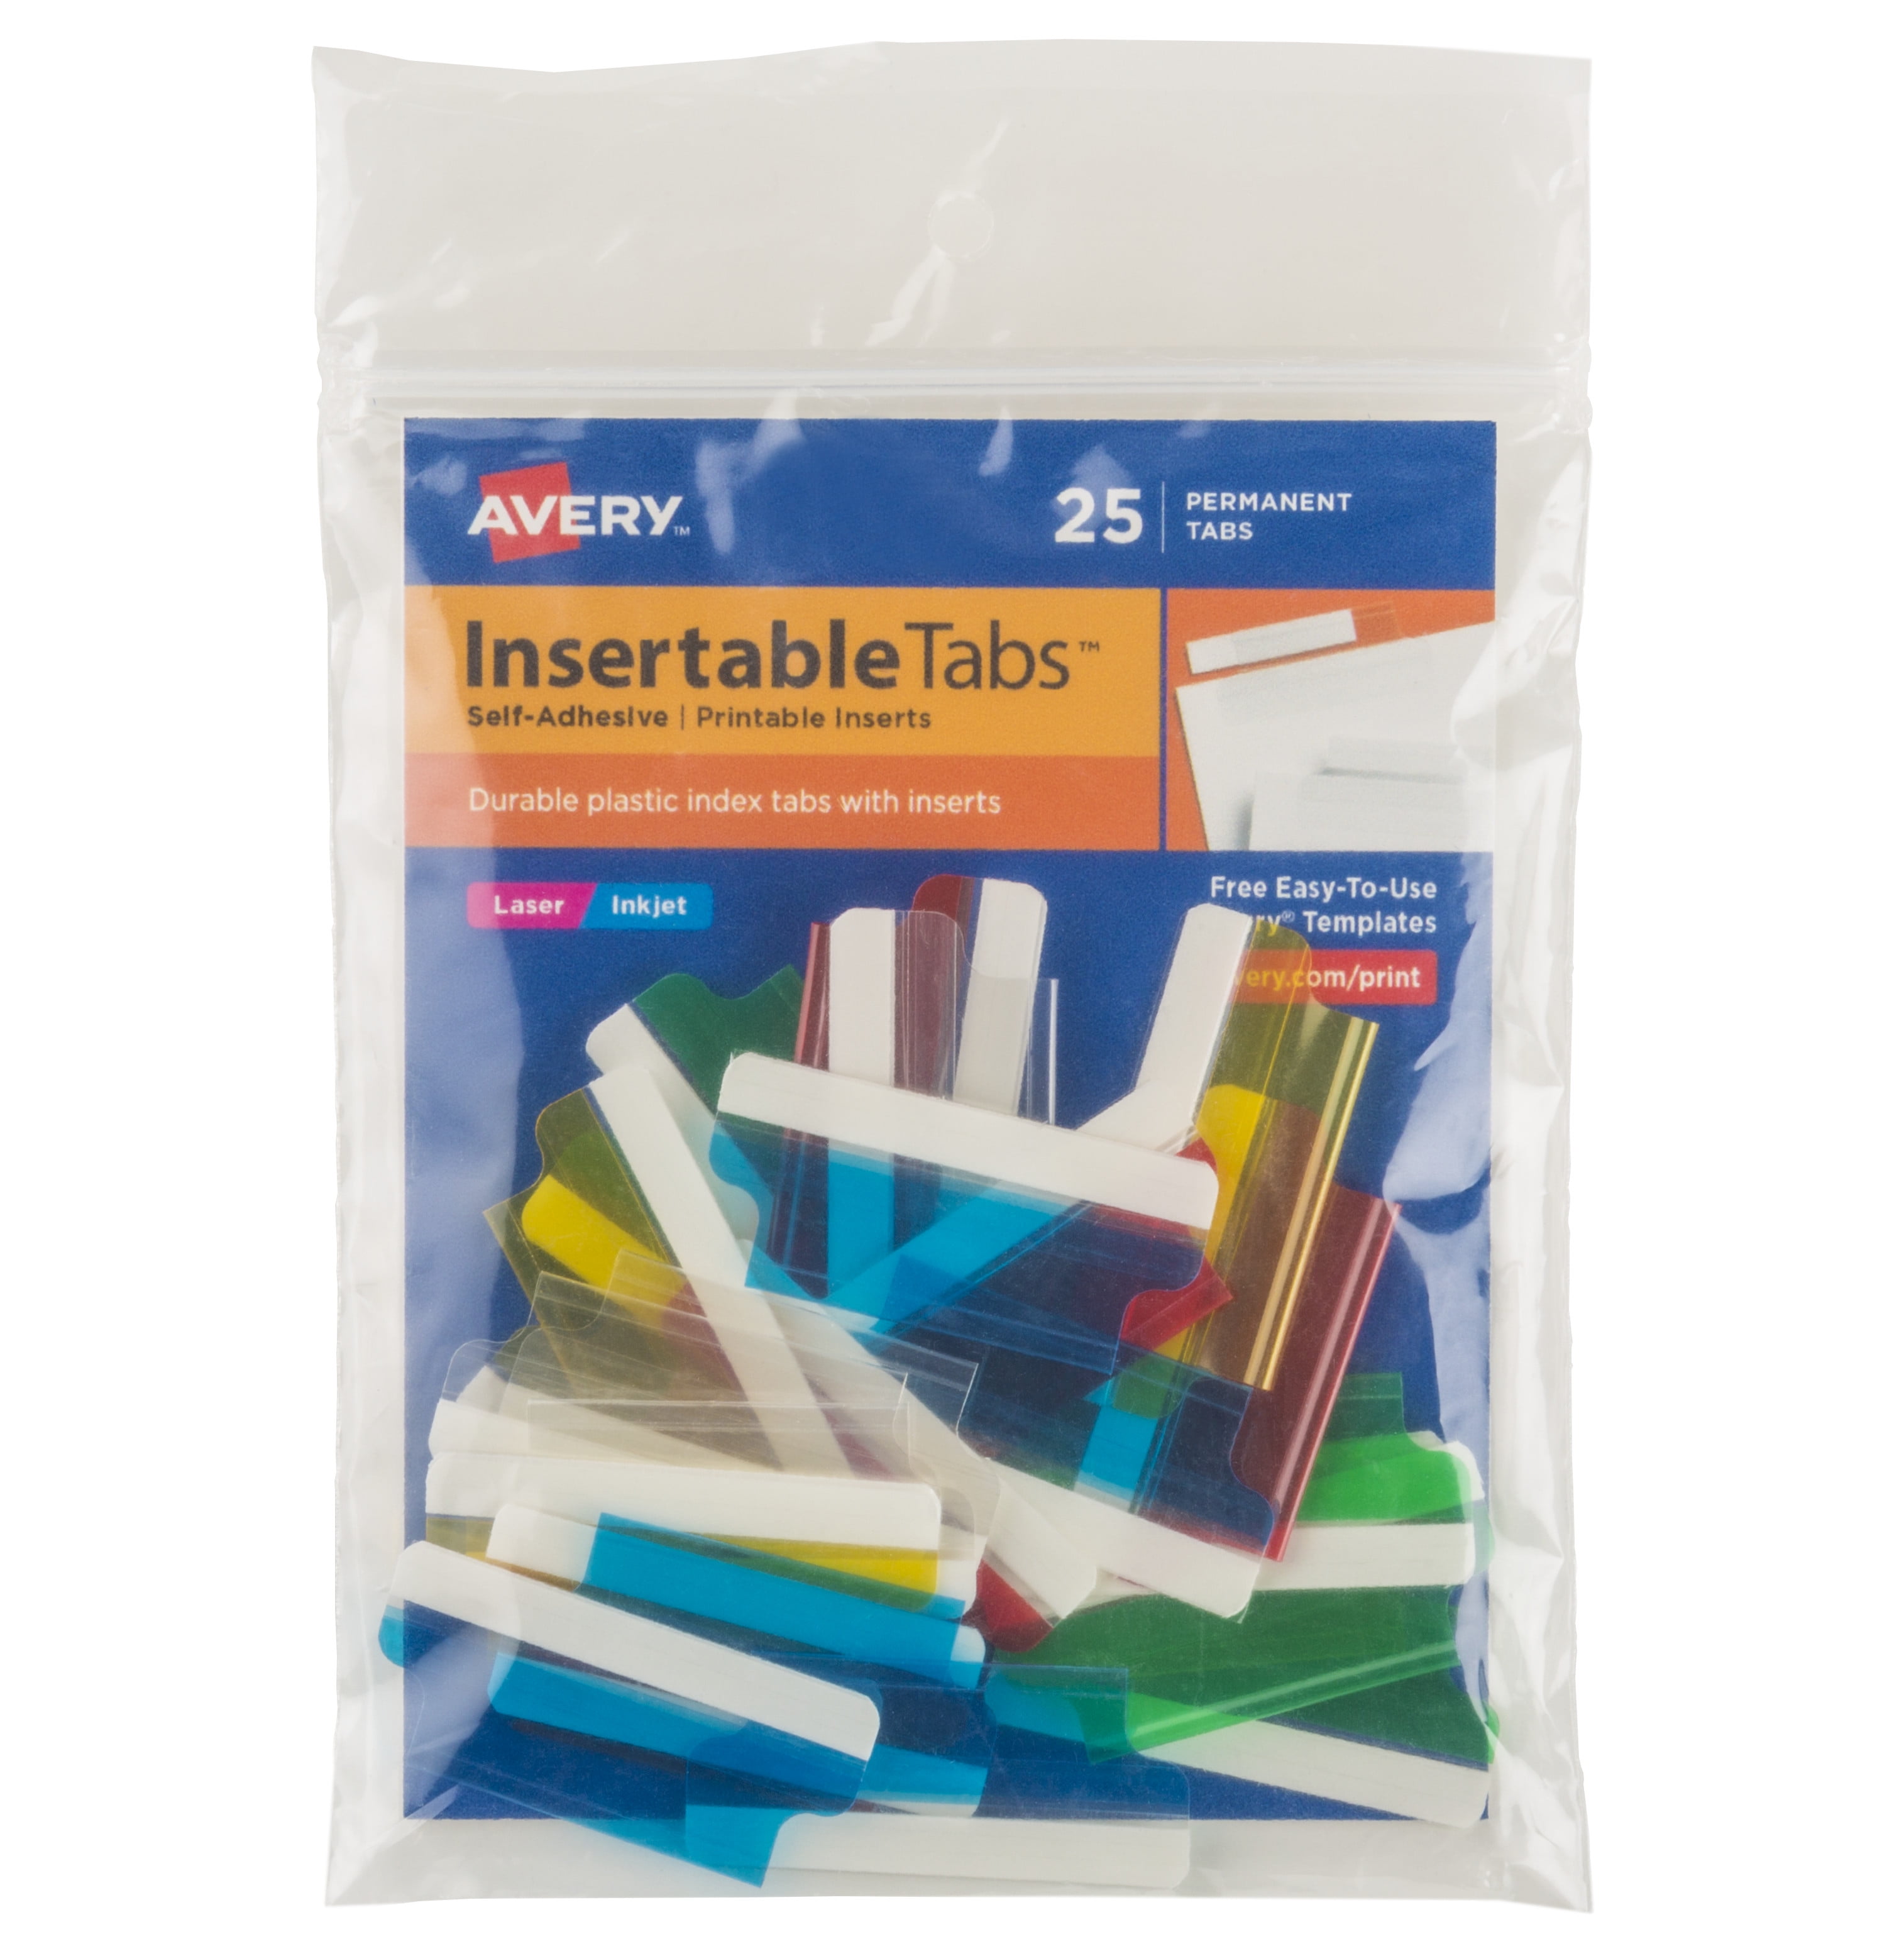 Avery Insertable Tabs, Printable Inserts, 11/2" Assorted, 25 Tabs